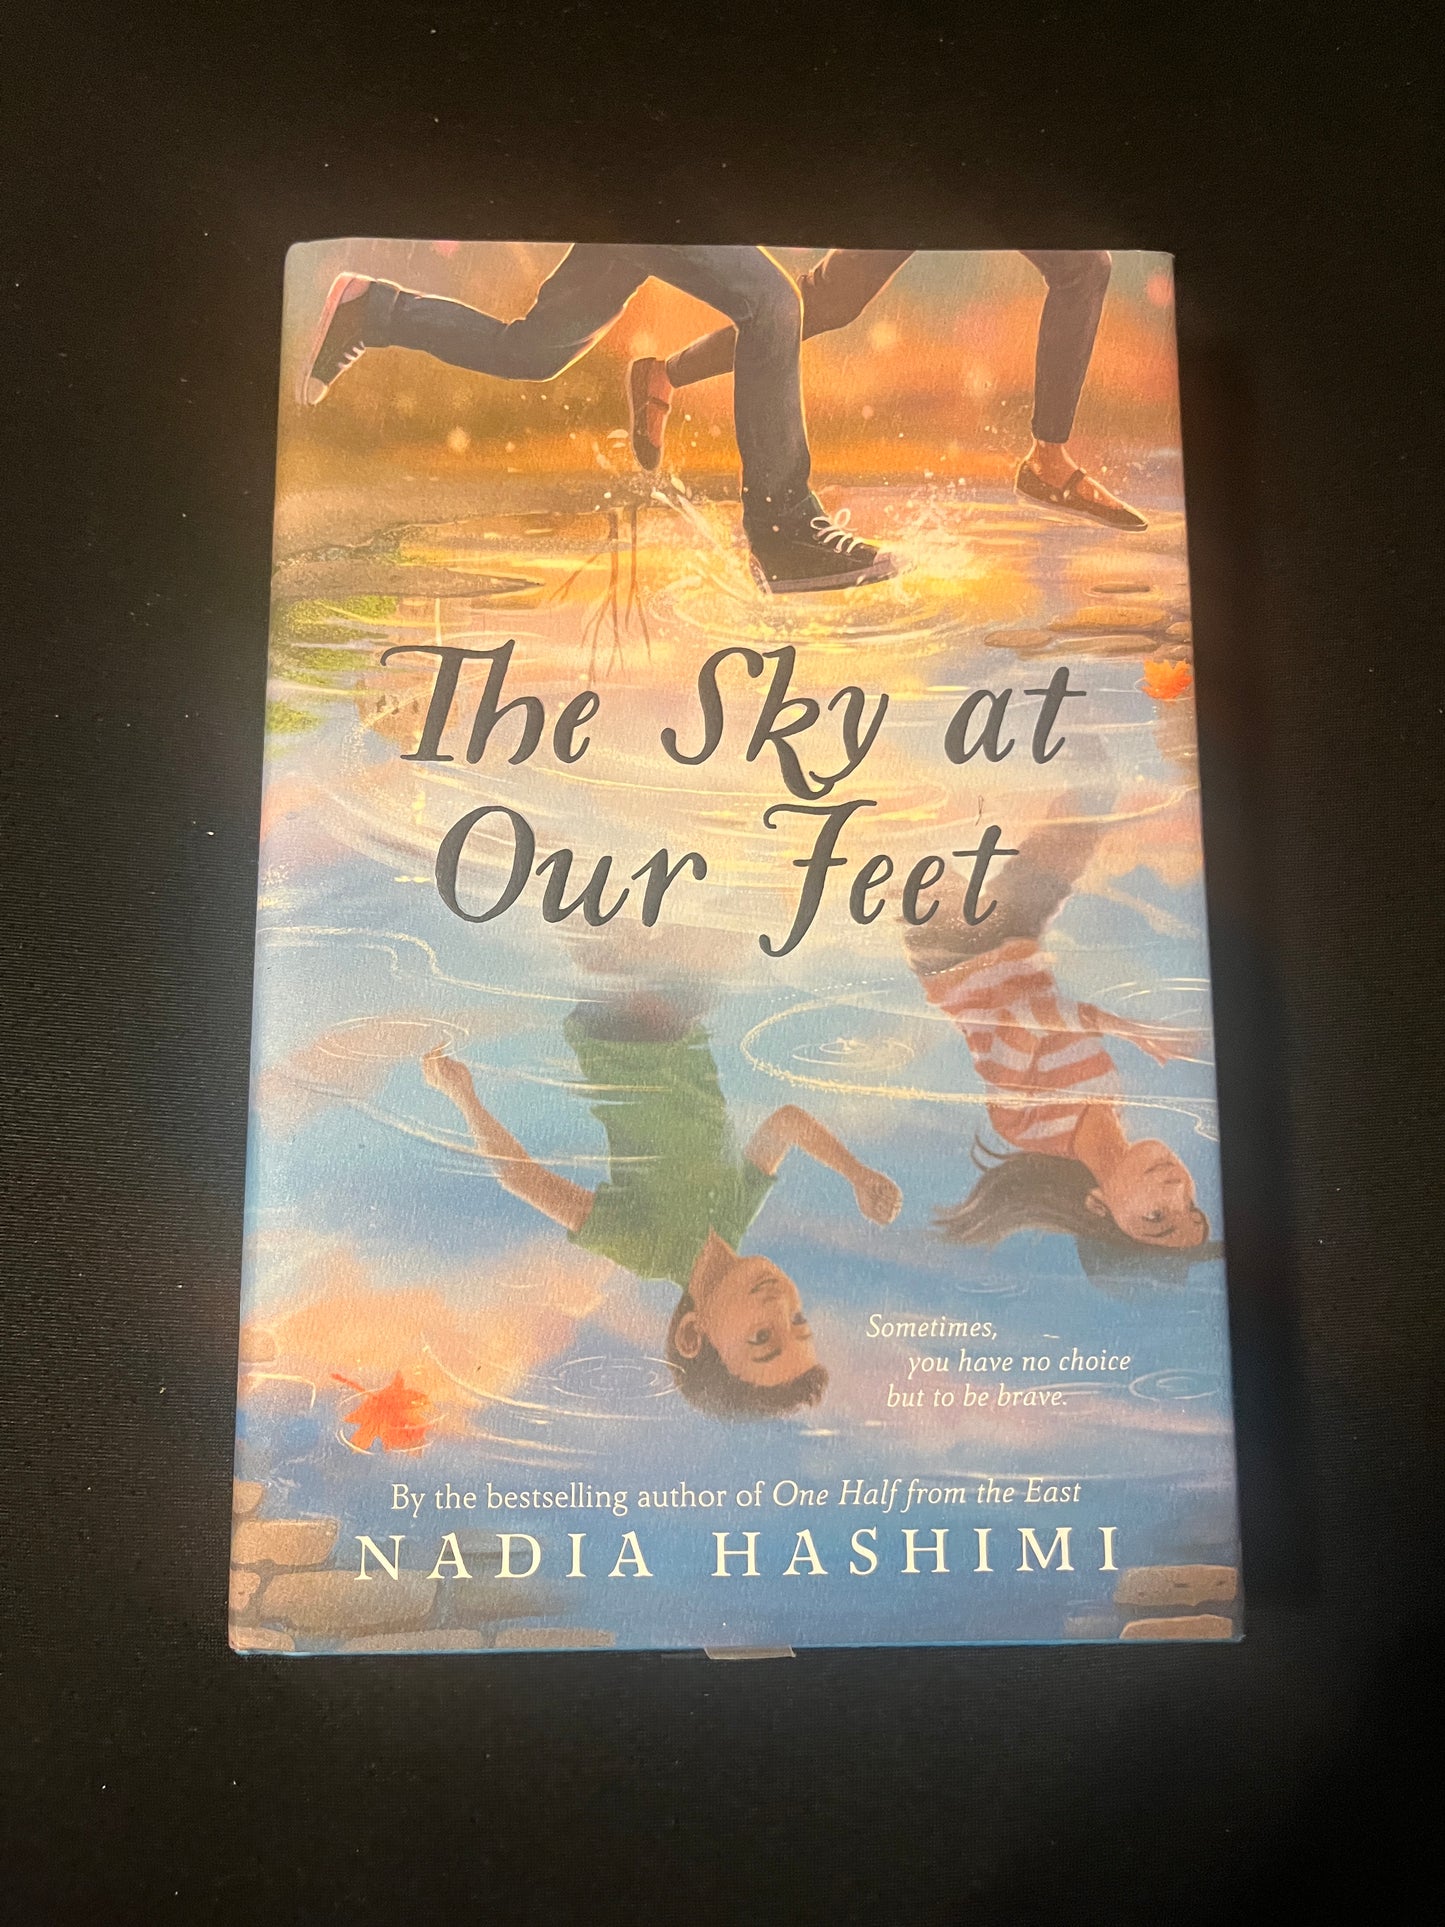 THE SKY AT OUR FEET by Nadia Hashimi